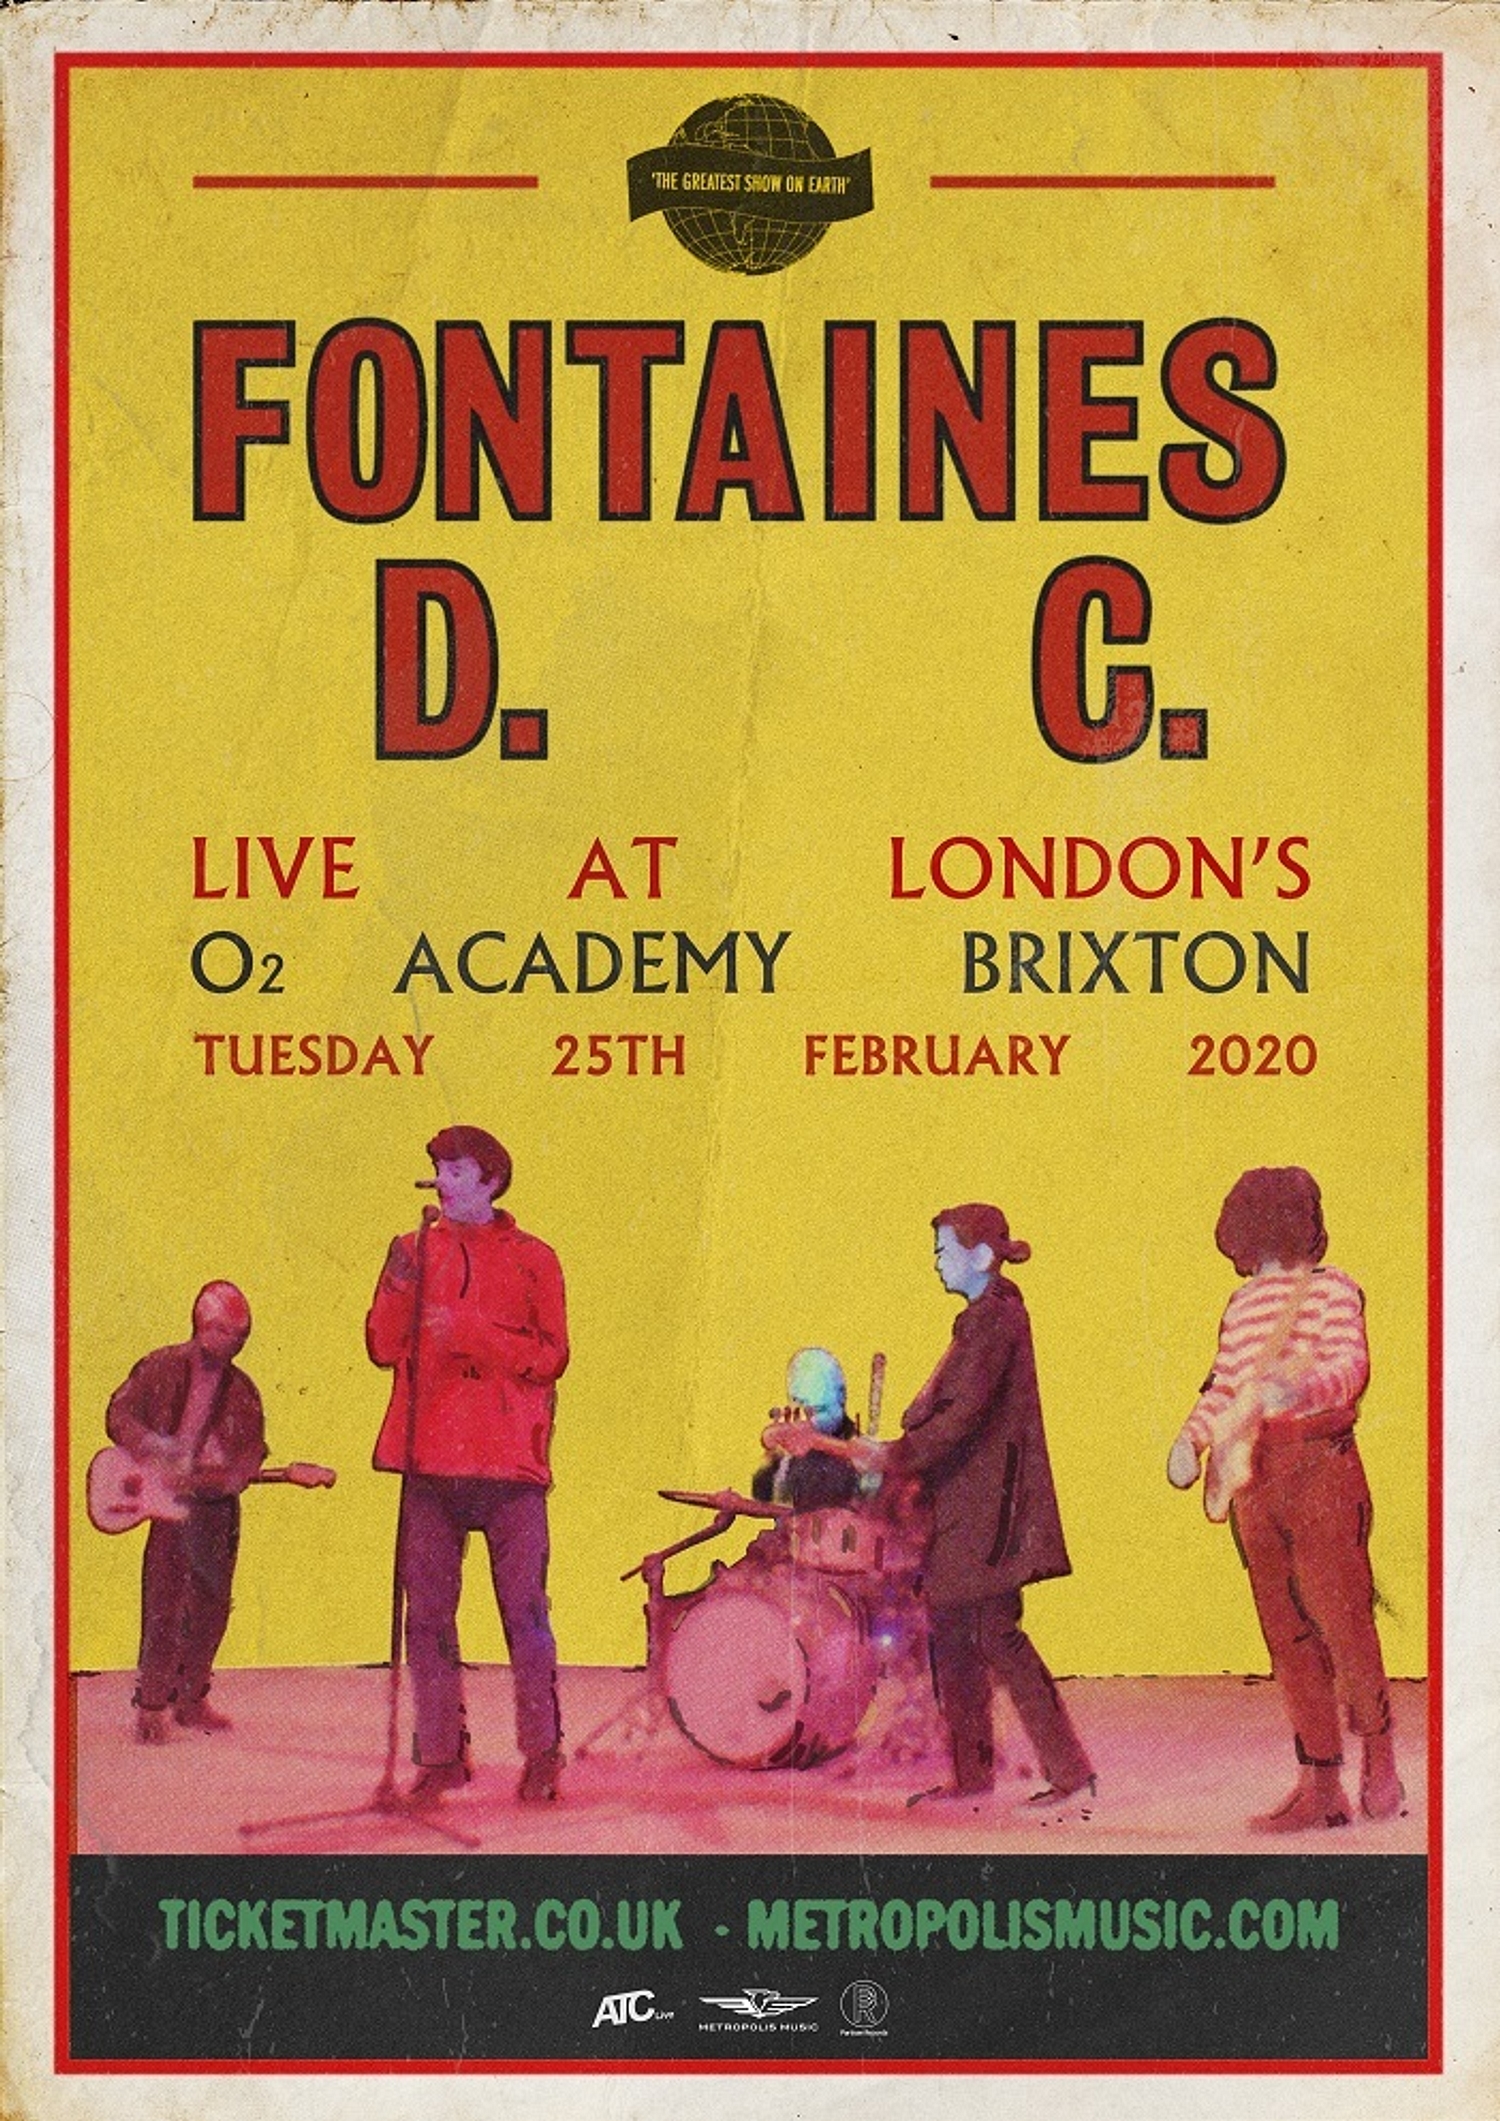 Fontaines DC announce headline show at London's O2 Academy Brixton